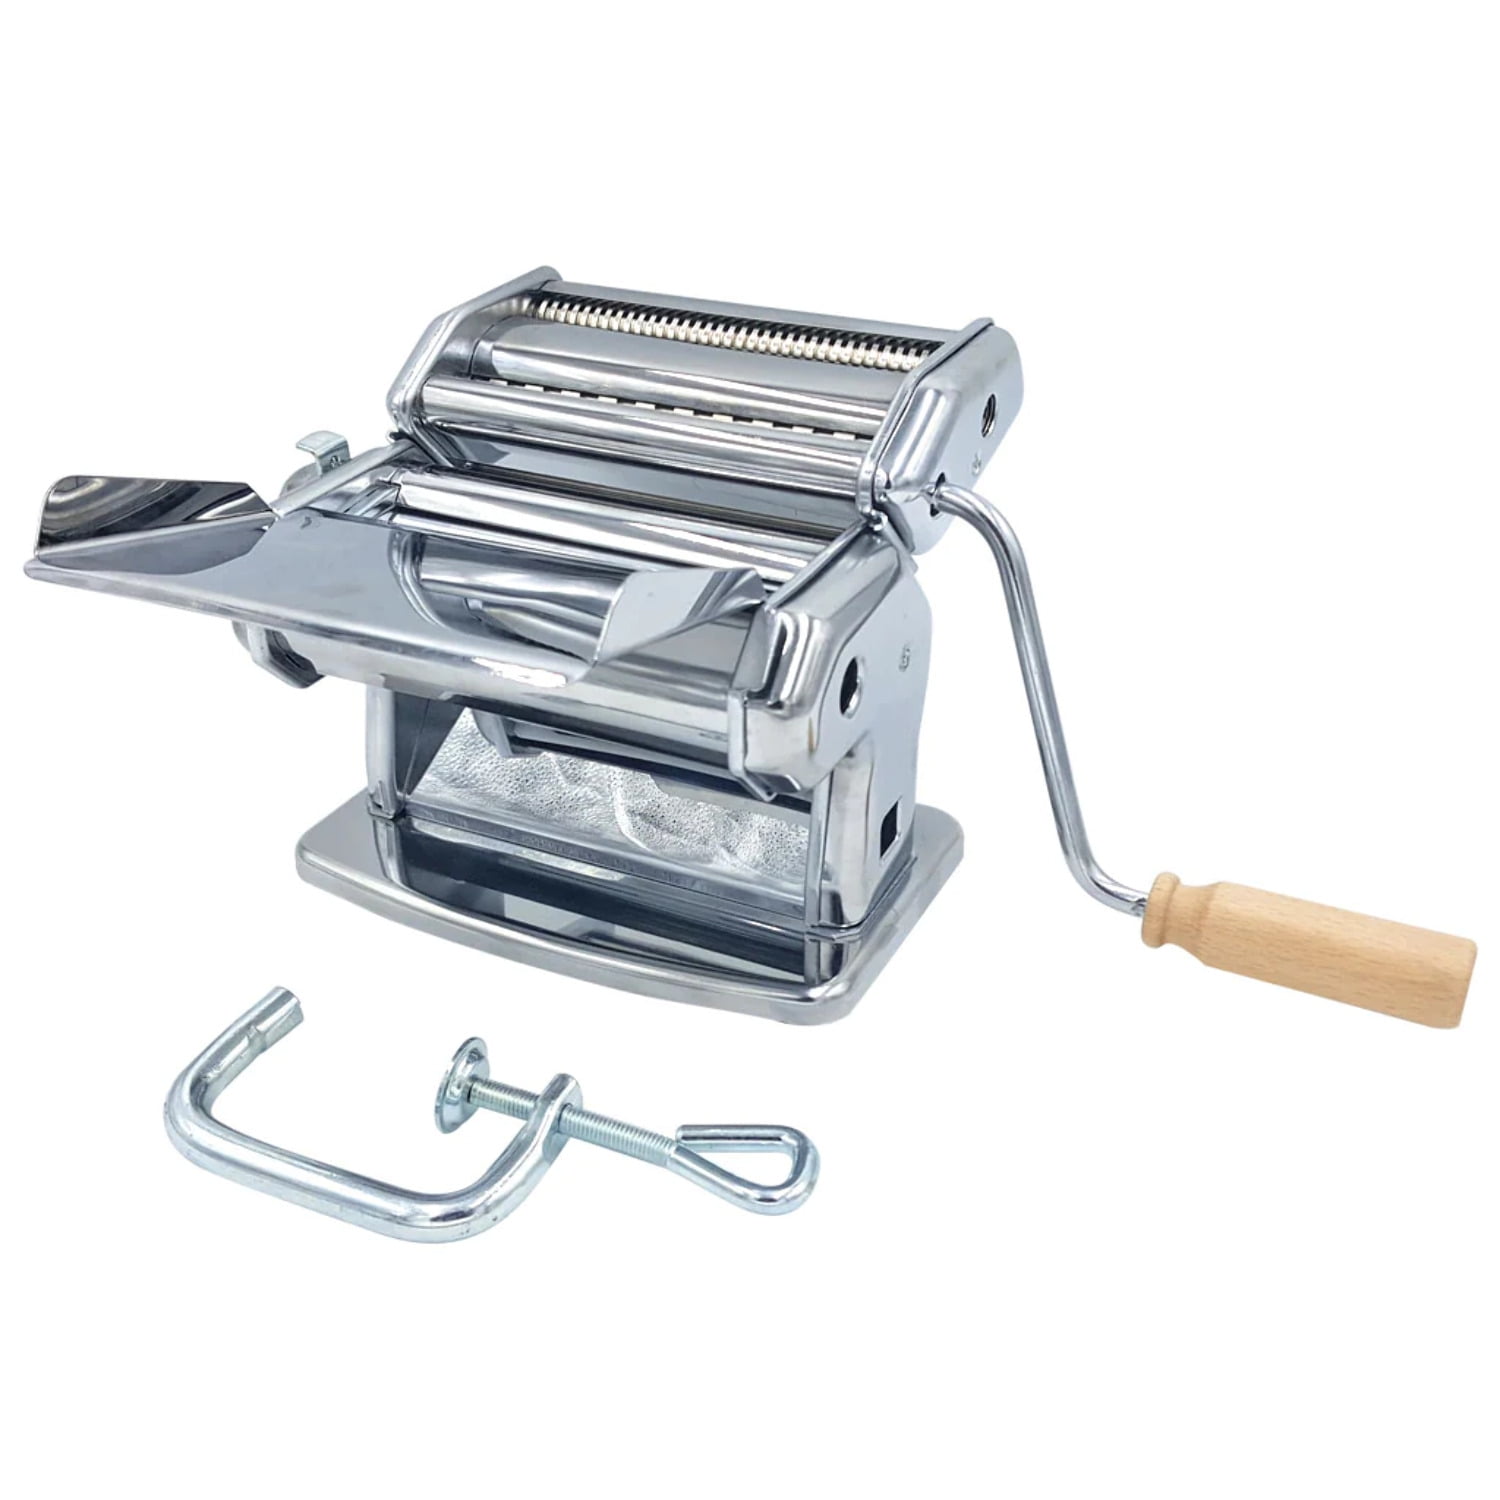 Imperia Pasta Maker Machine - household items - by owner - housewares sale  - craigslist